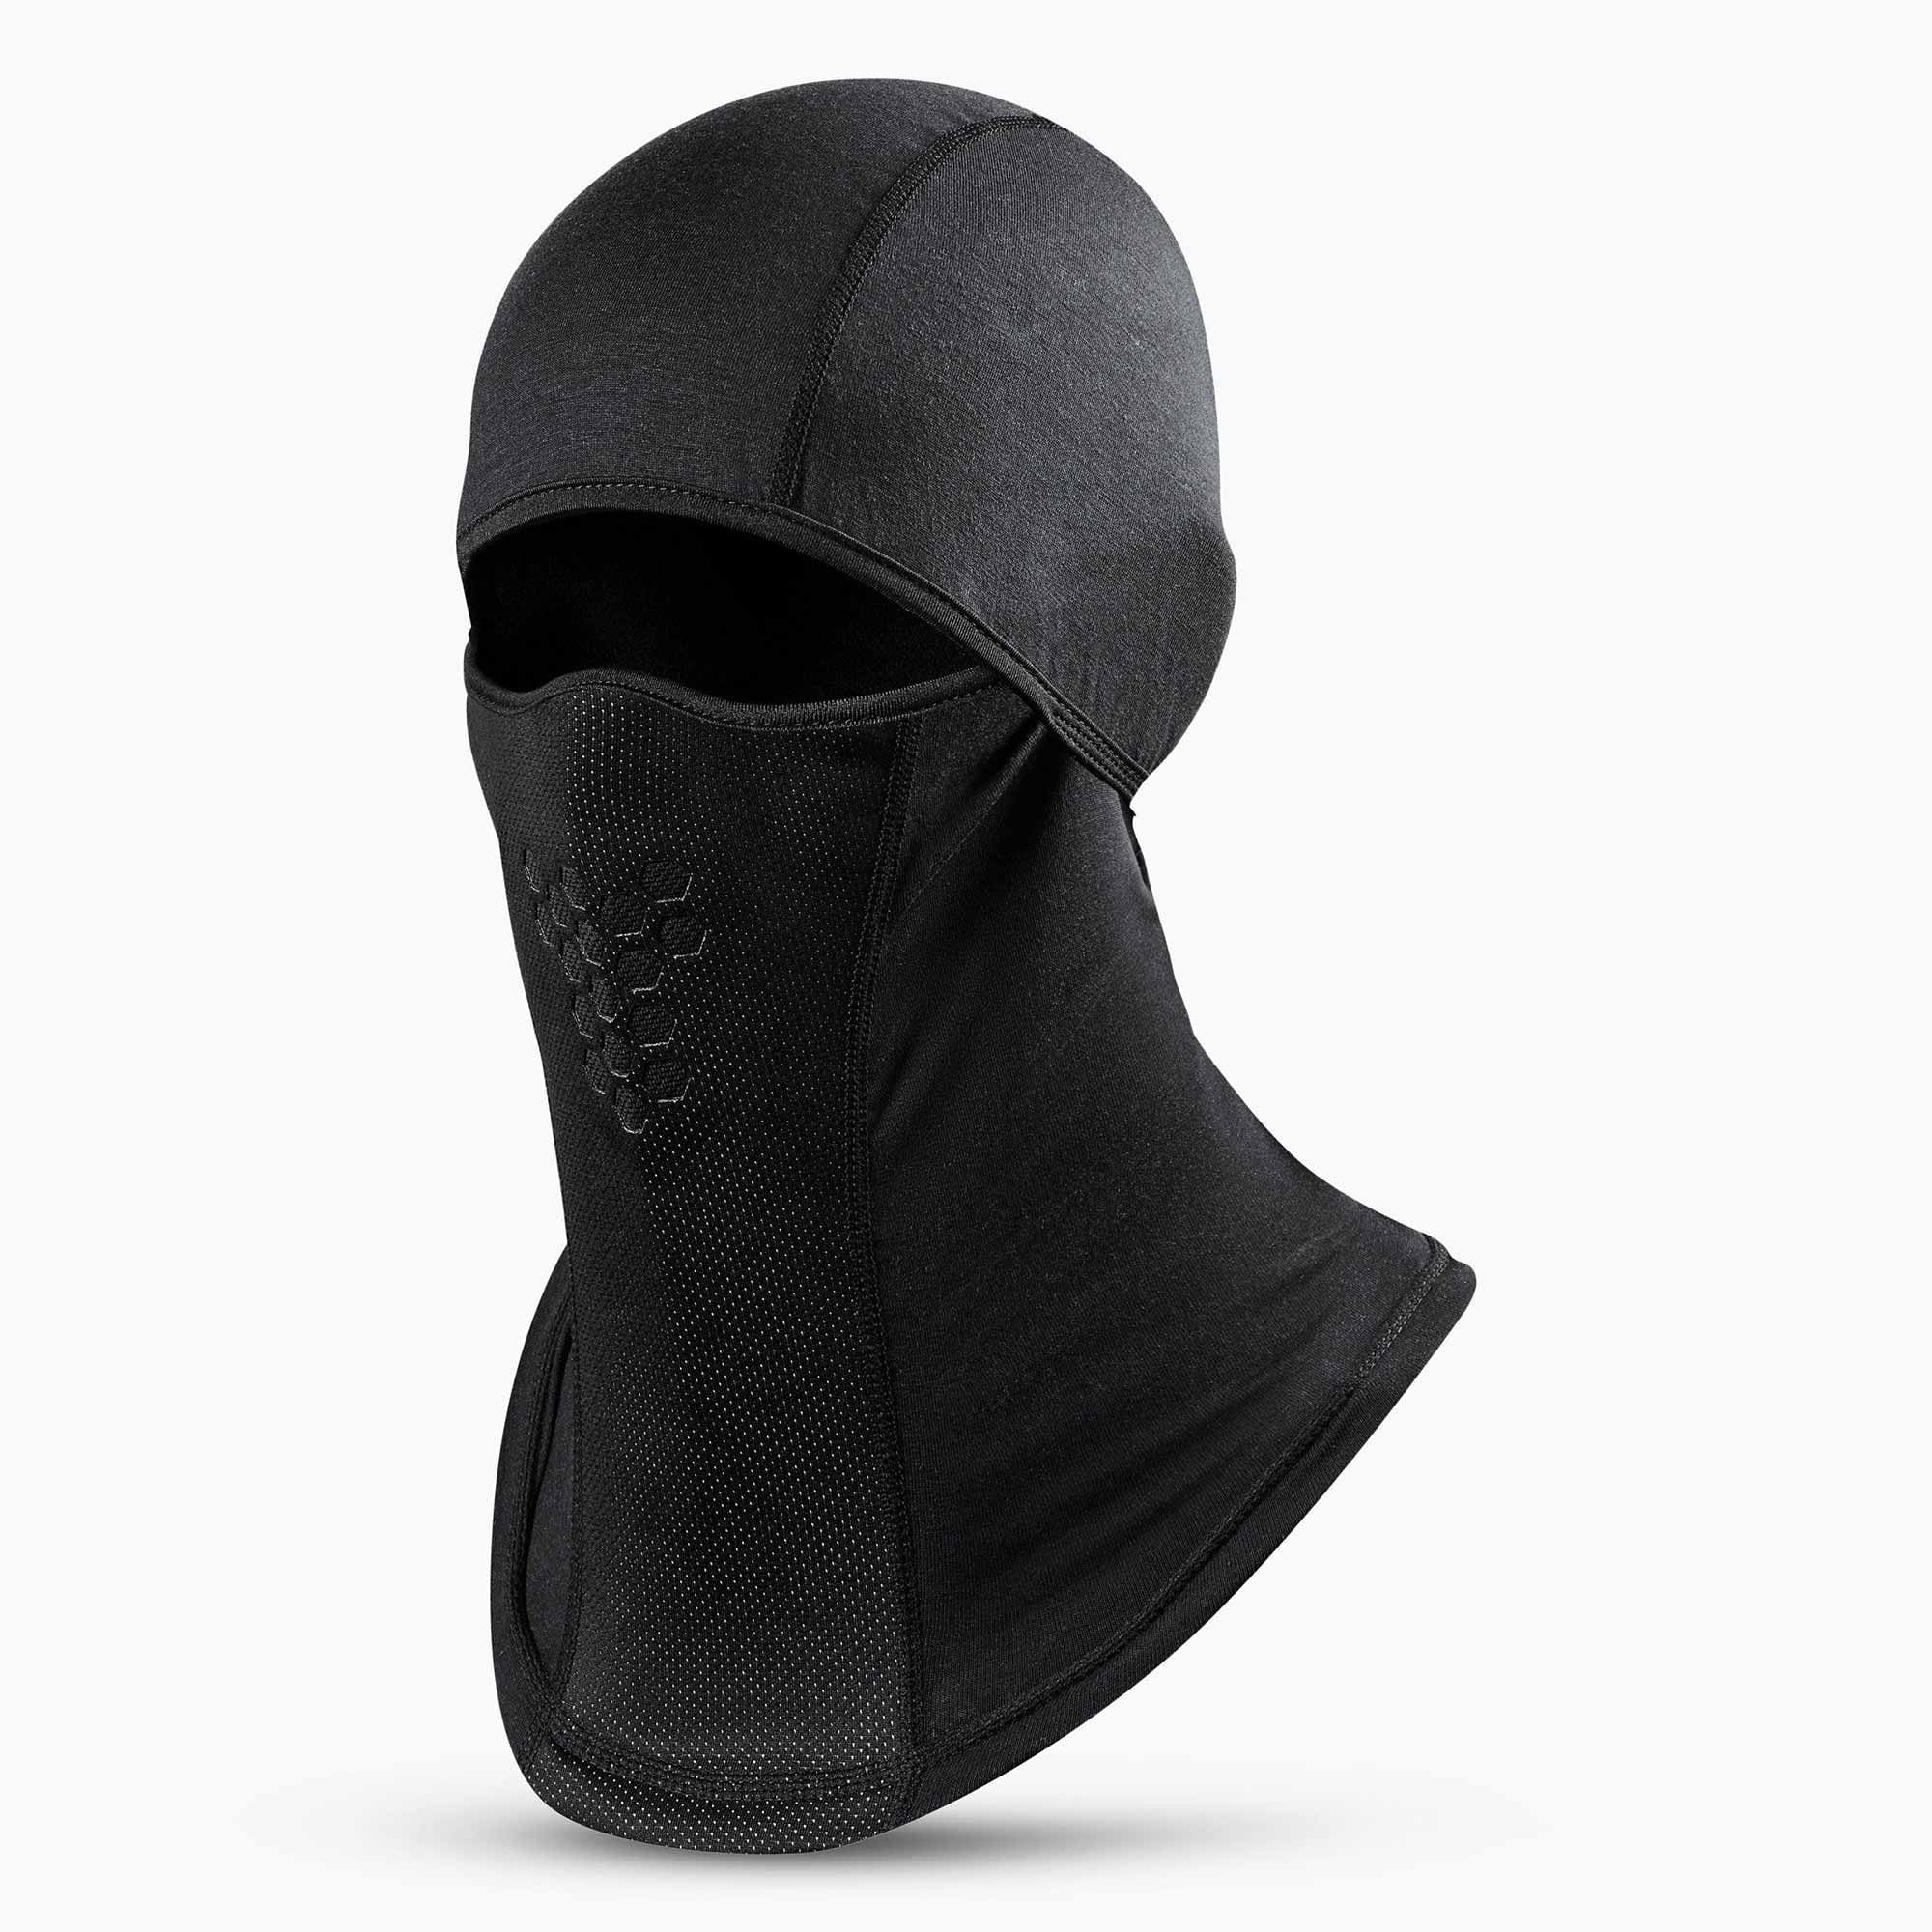 The Rev’It Perseus Balaclava keeps you warm and cozy.